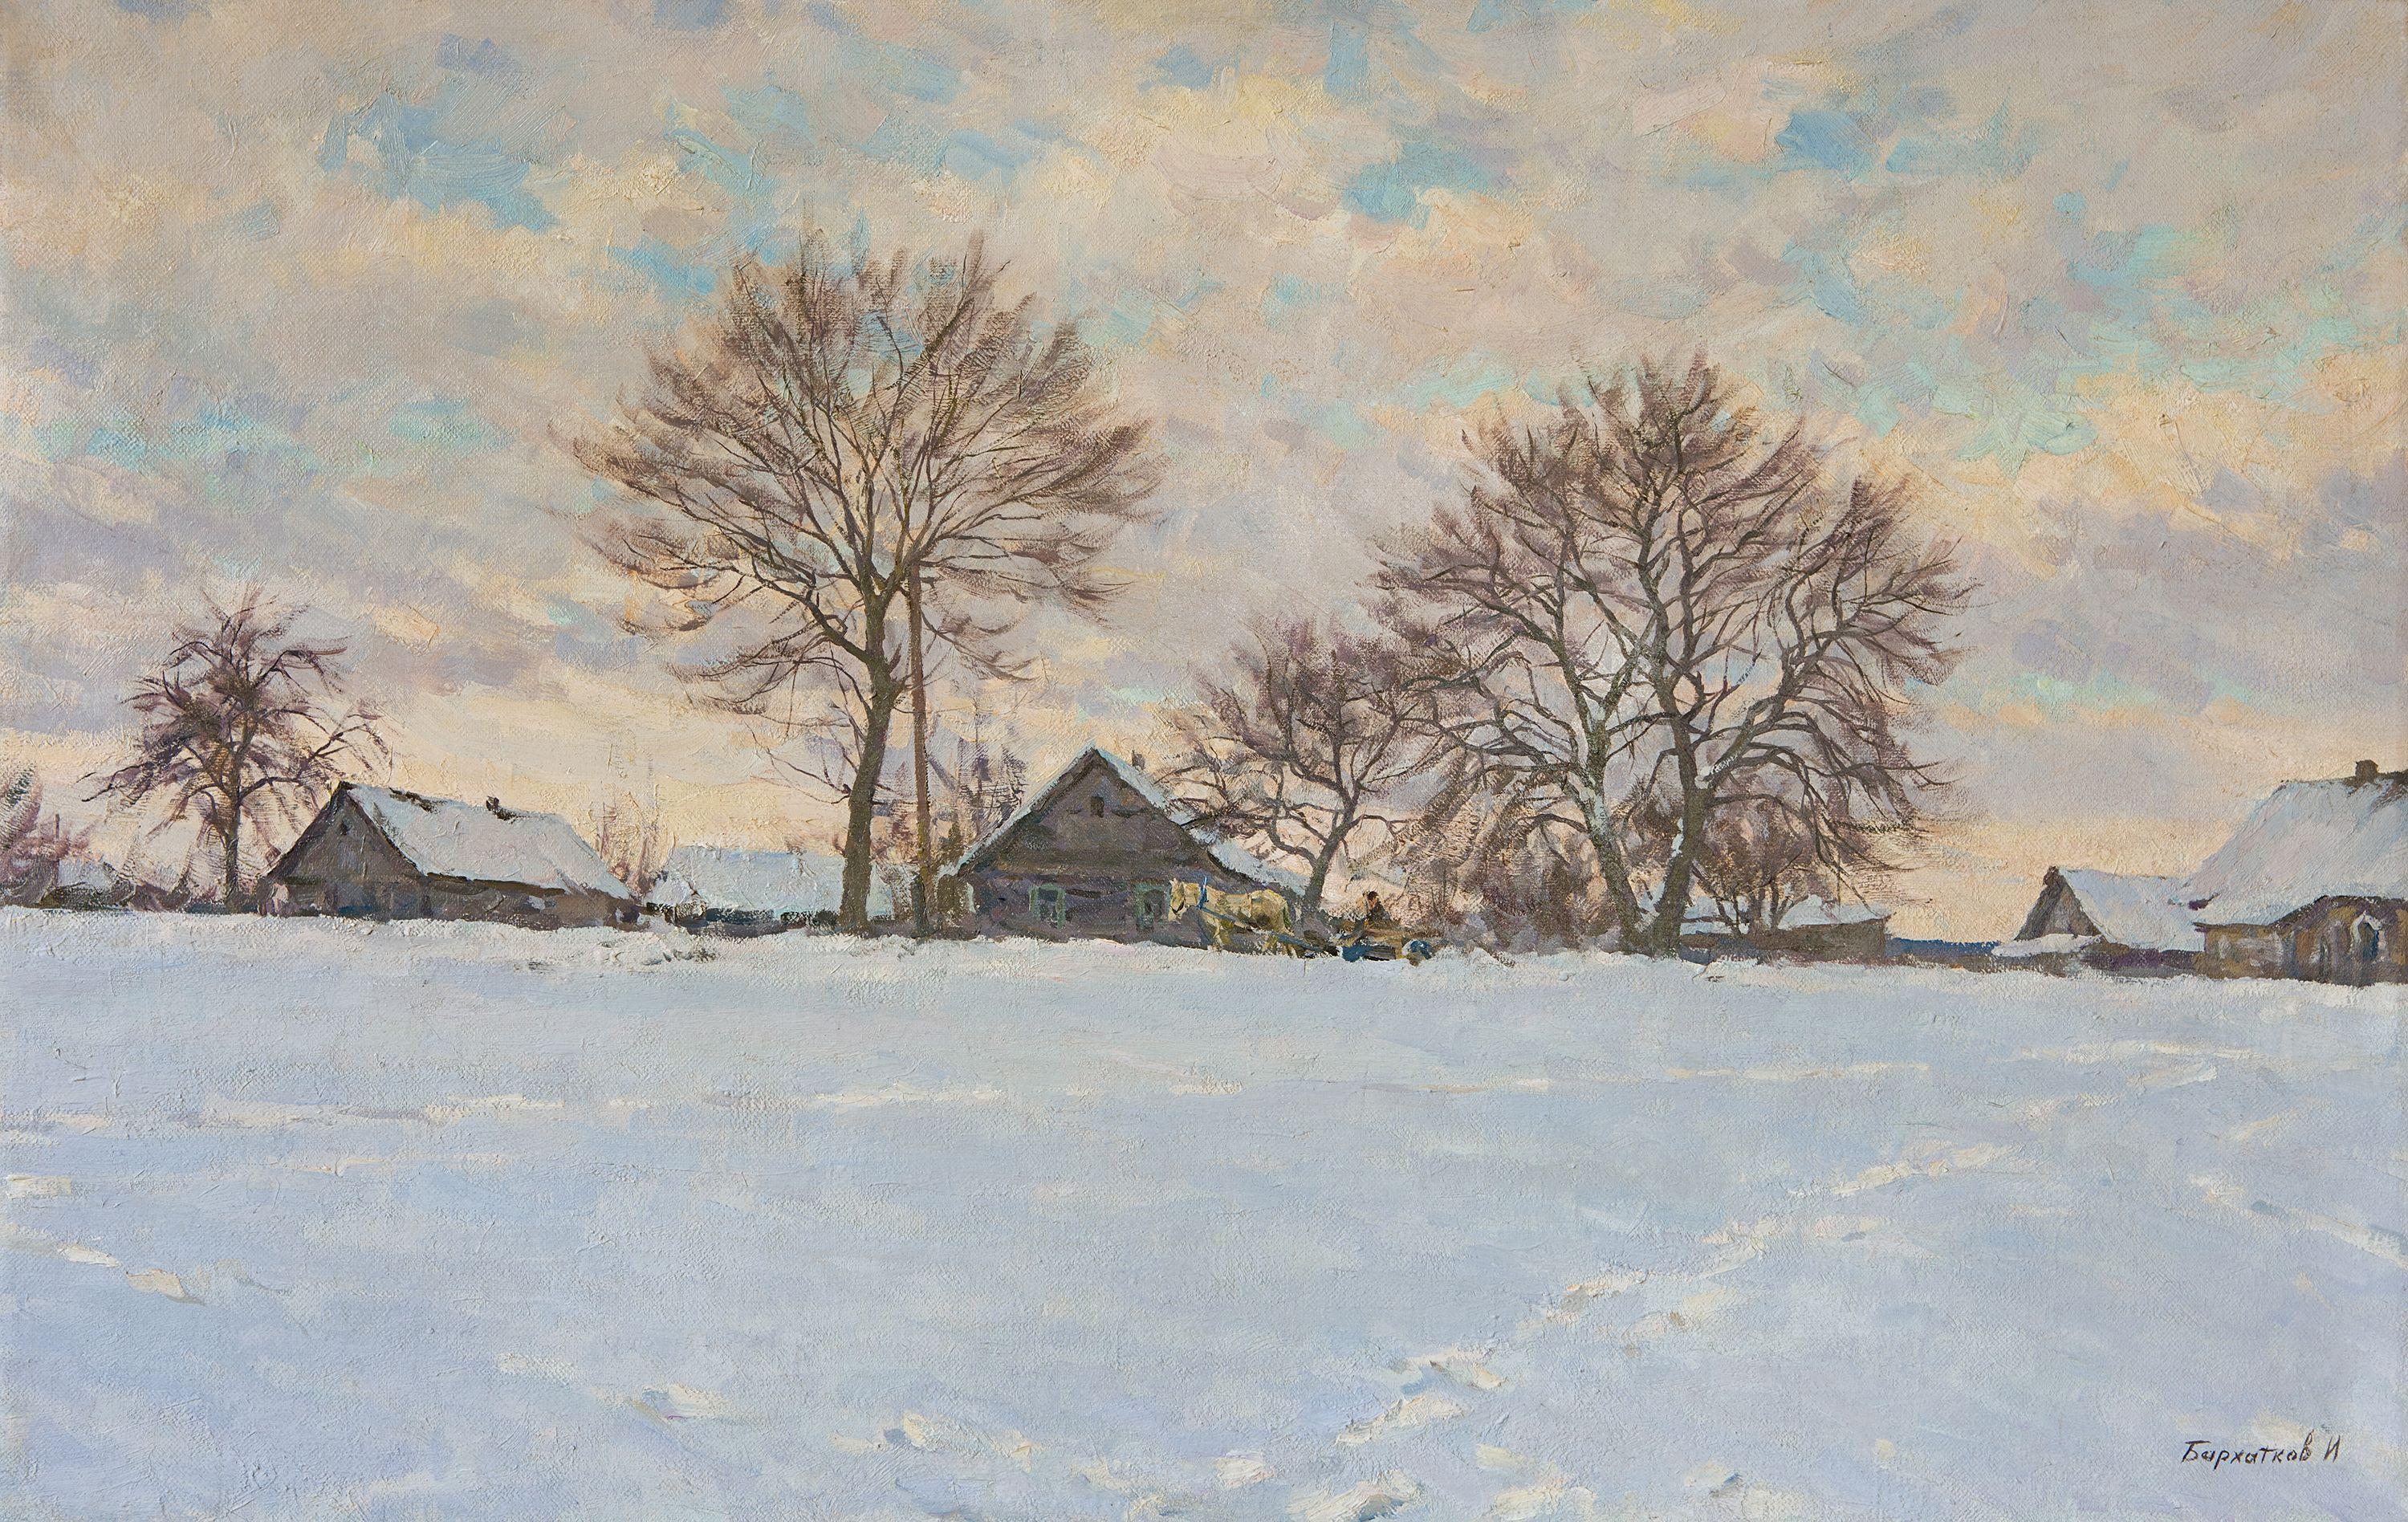 Title: Winter in the village of Khoruzhi;  Year: 2006;  Medium and support: oil on canvas;  Dimensions: h 54 cm Ã— w 85 cm Ã— d 3 cm. :: Painting :: Realism :: This piece comes with an official certificate of authenticity signed by the artist ::